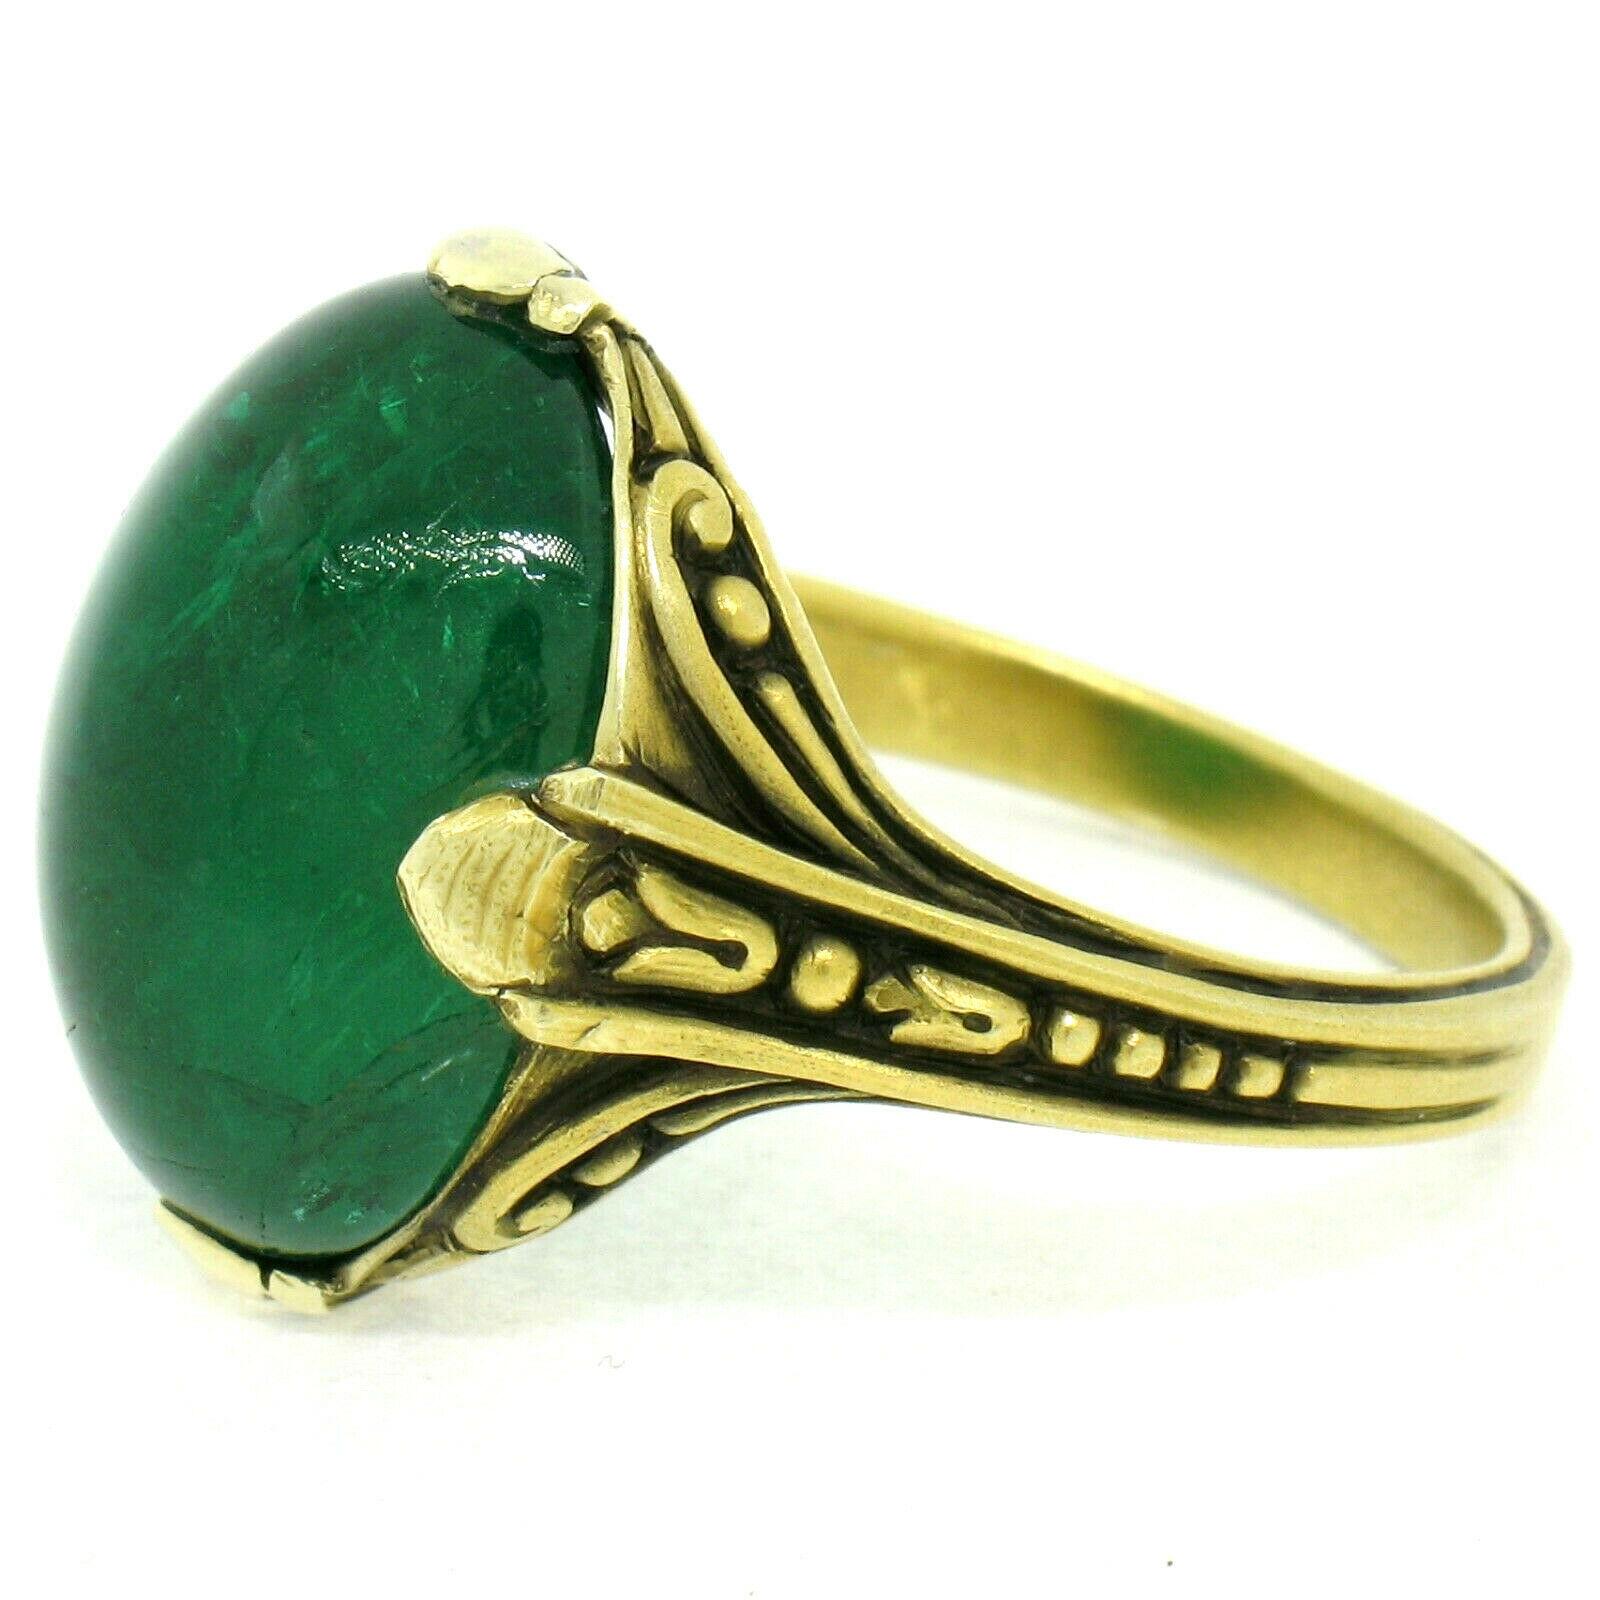 Antique 14k Gold 10.03ct GIA Oval Cabochon Very Fine Green Zambian Emerald Ring 1